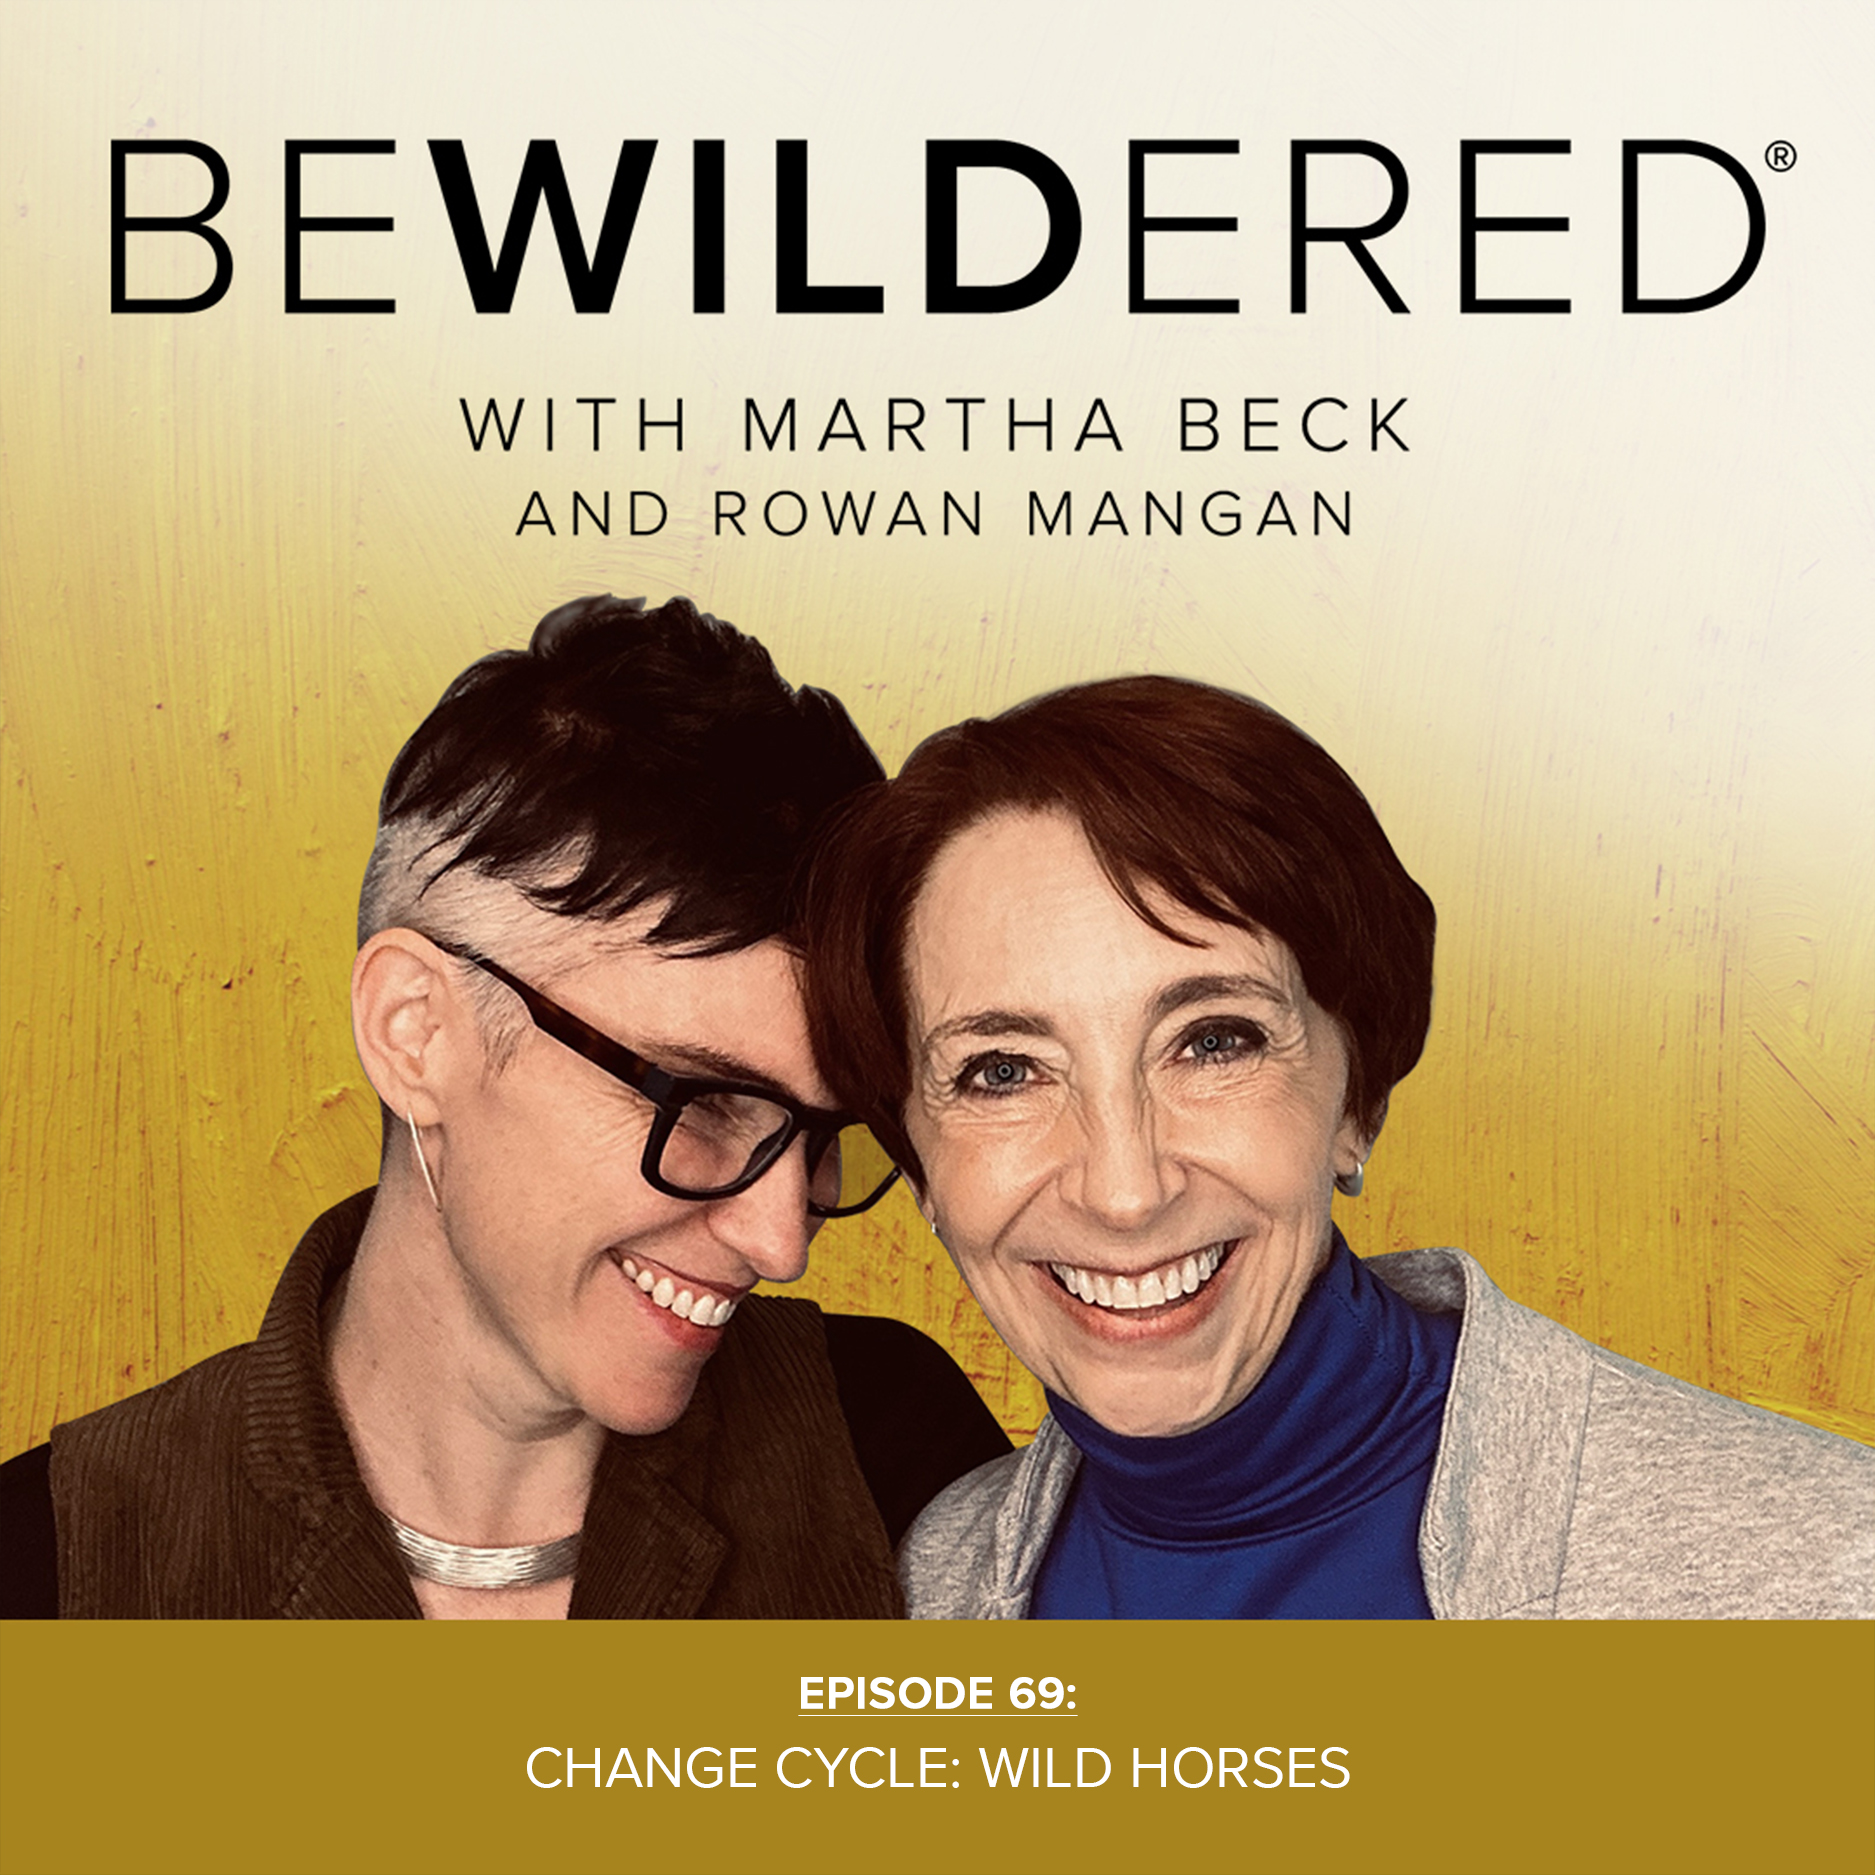 Image for Episode #69 Change Cycle: Wild Horses for the Bewildered Podcast with Martha Beck and Rowan Mangan